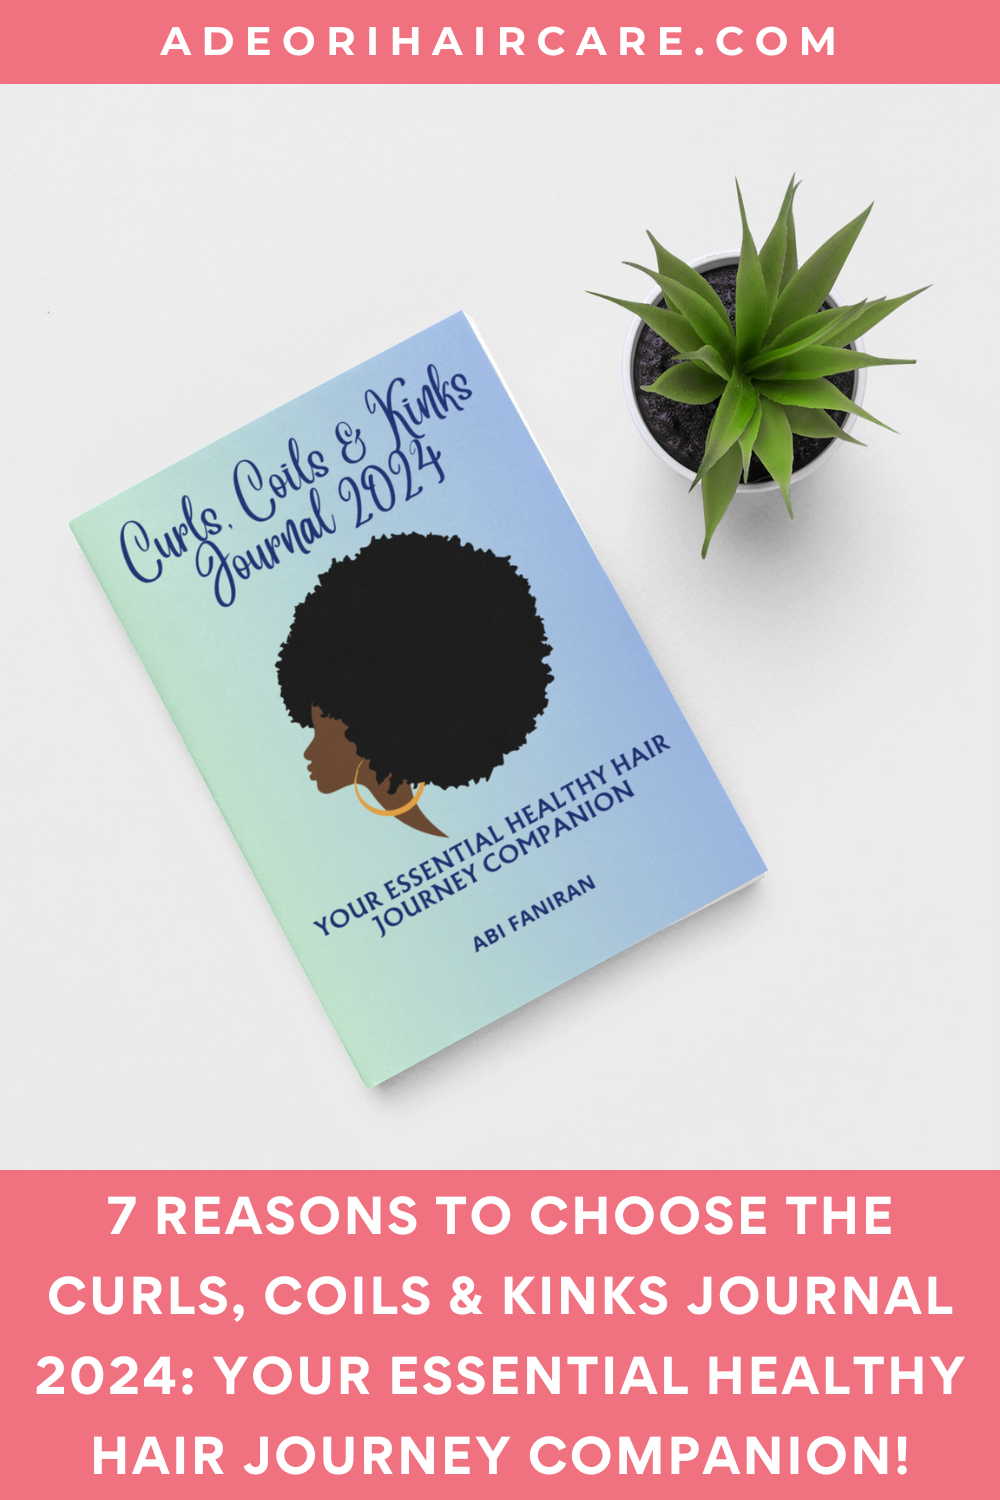 7-Reasons-To-Choose-the-Curls-Coils-Kinks-Journal-2024-Your-Essential-Healthy-Hair-Journey-Companion